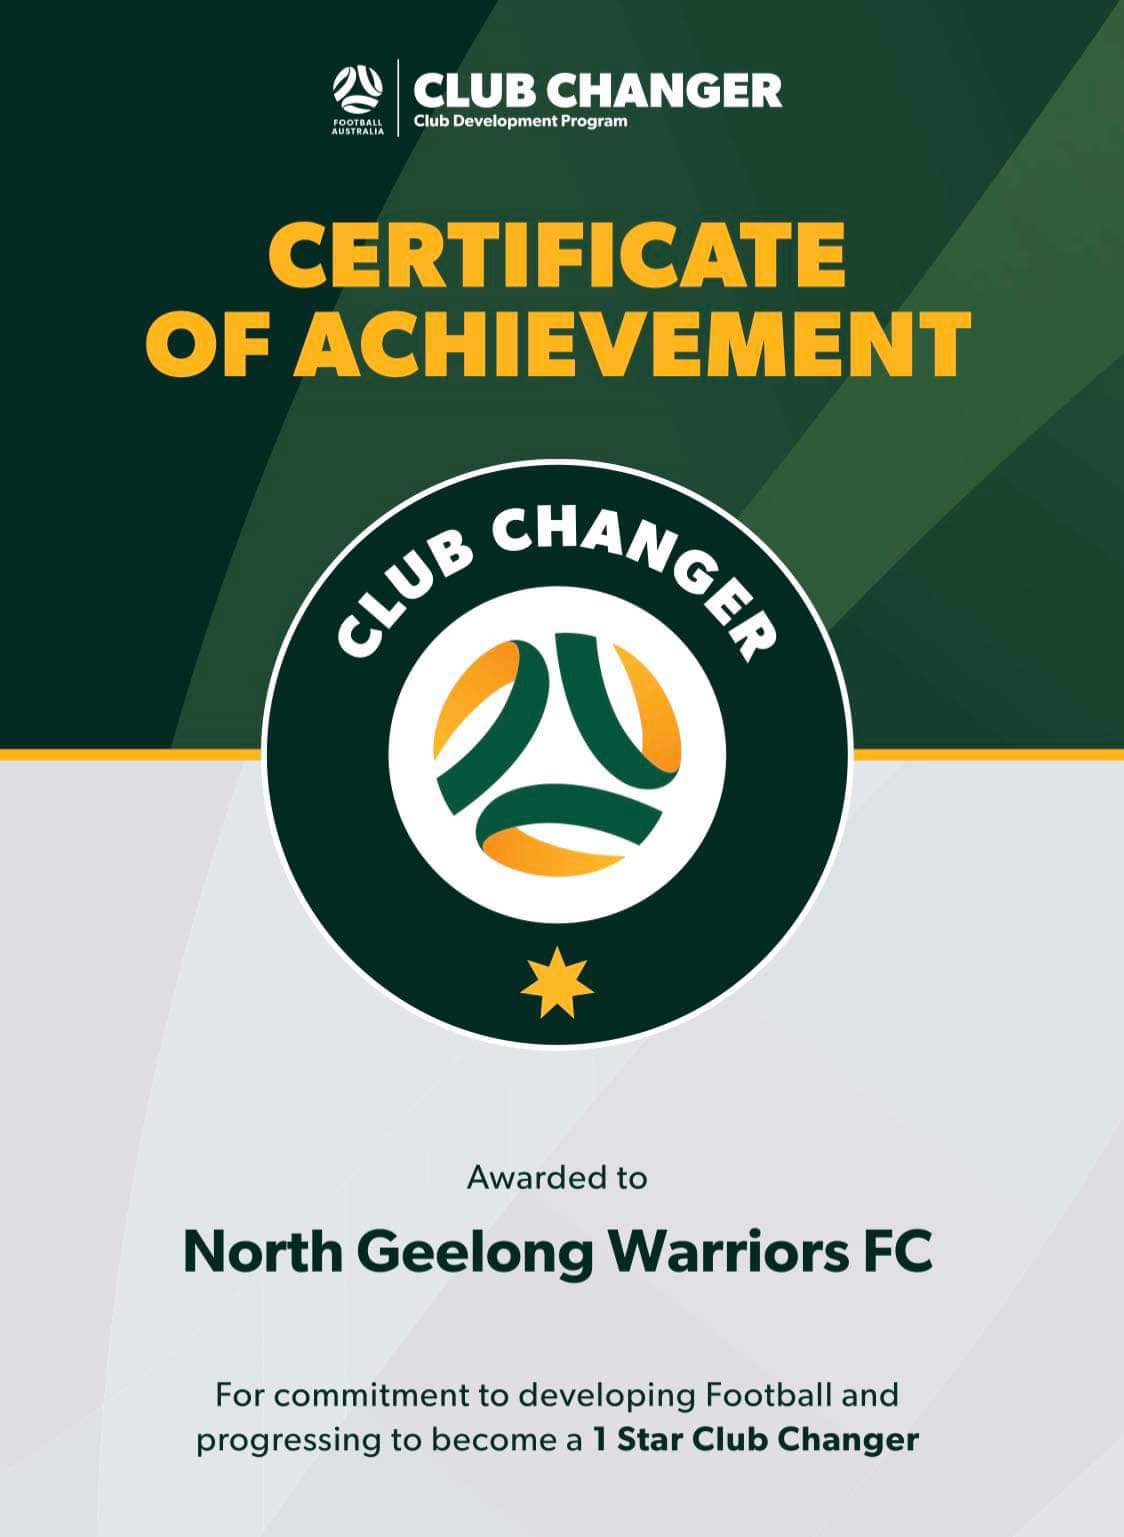 Club gets accreditation in the Game Changer program